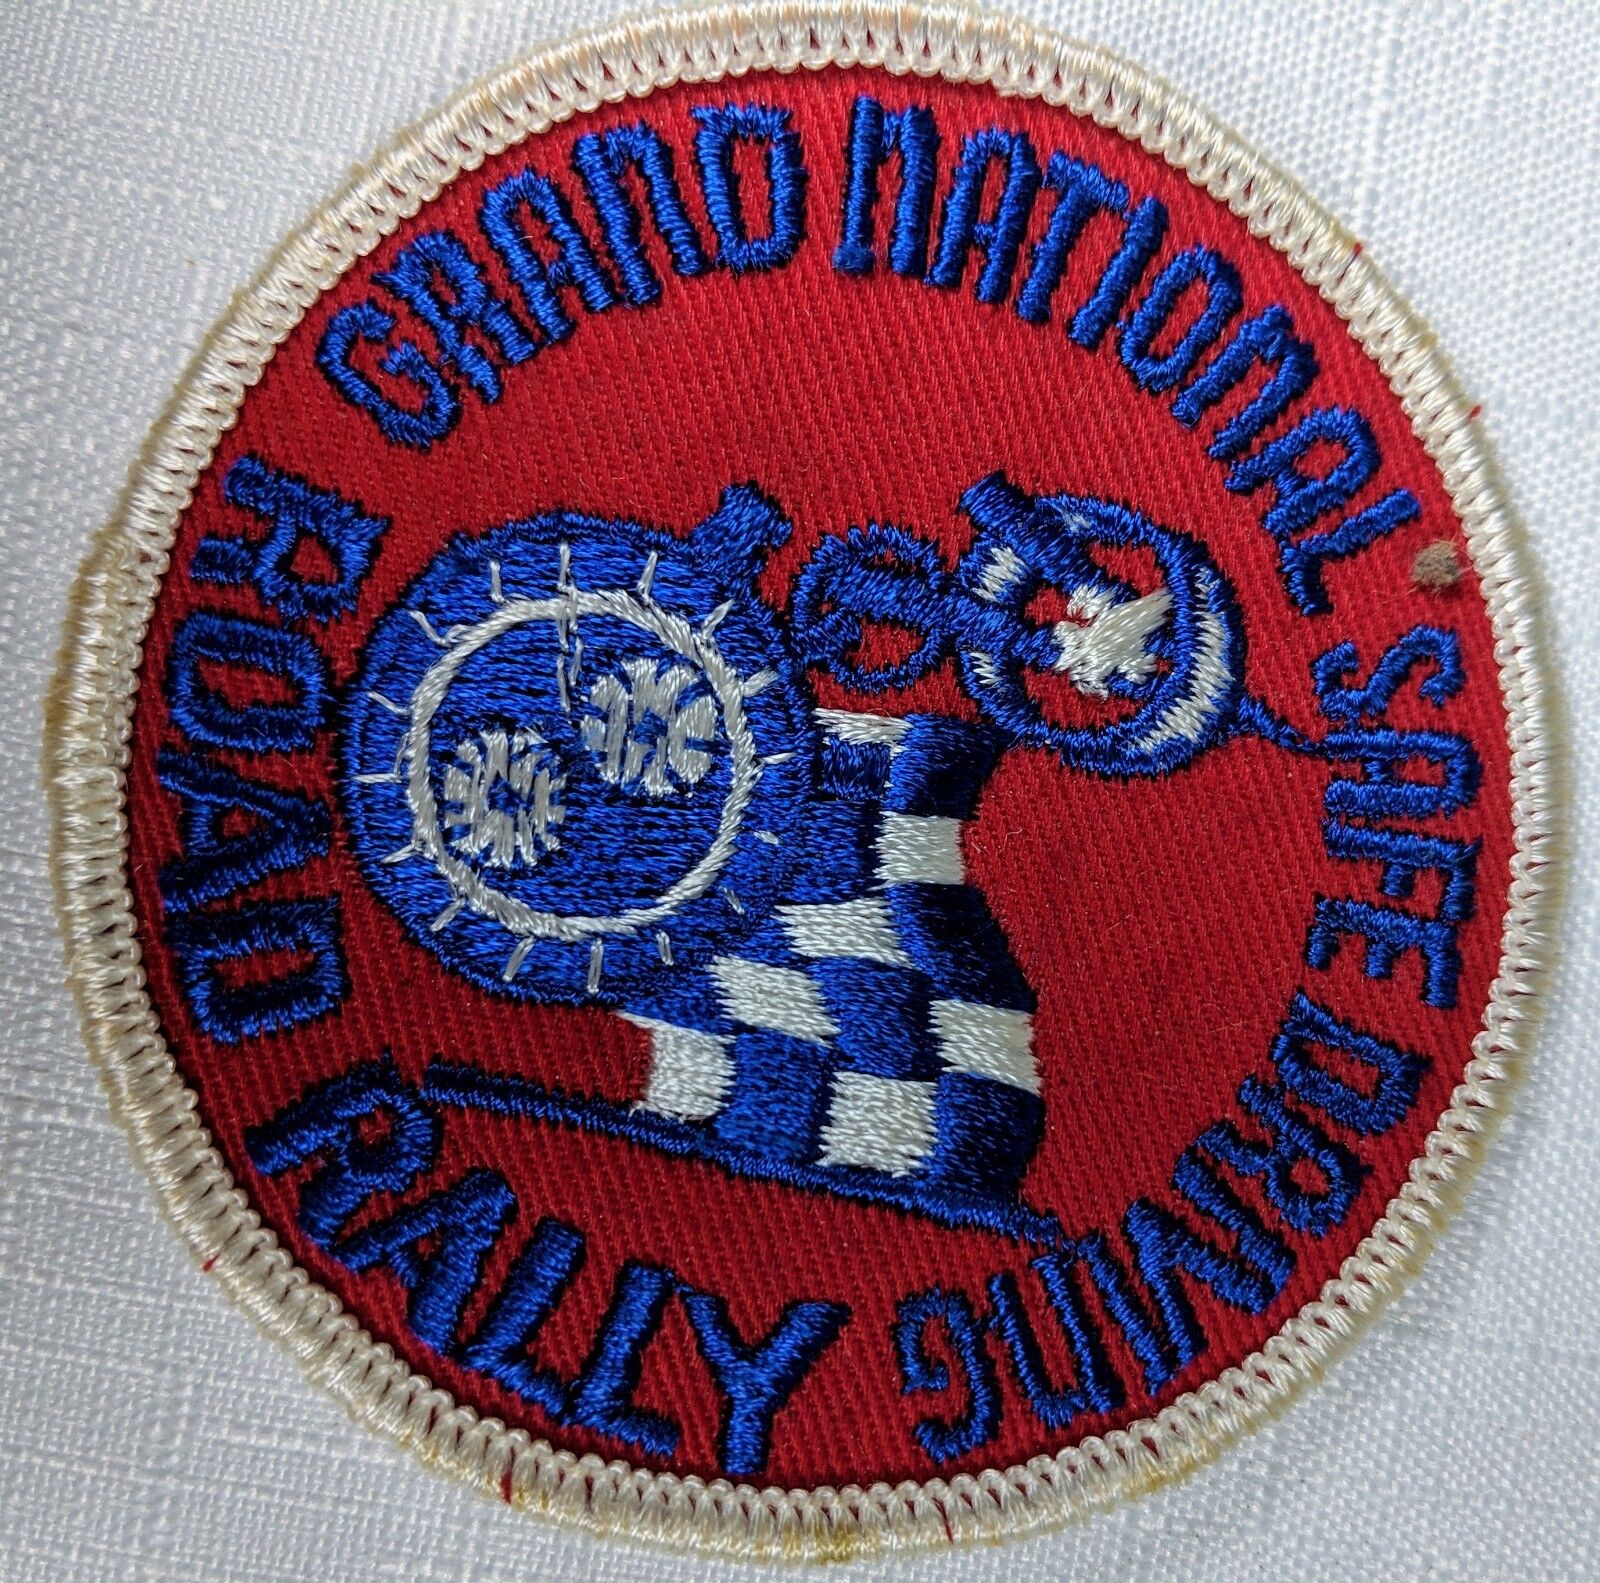 Grand National Safe Driving Rally BSA Boy Scouts Patch 1960s